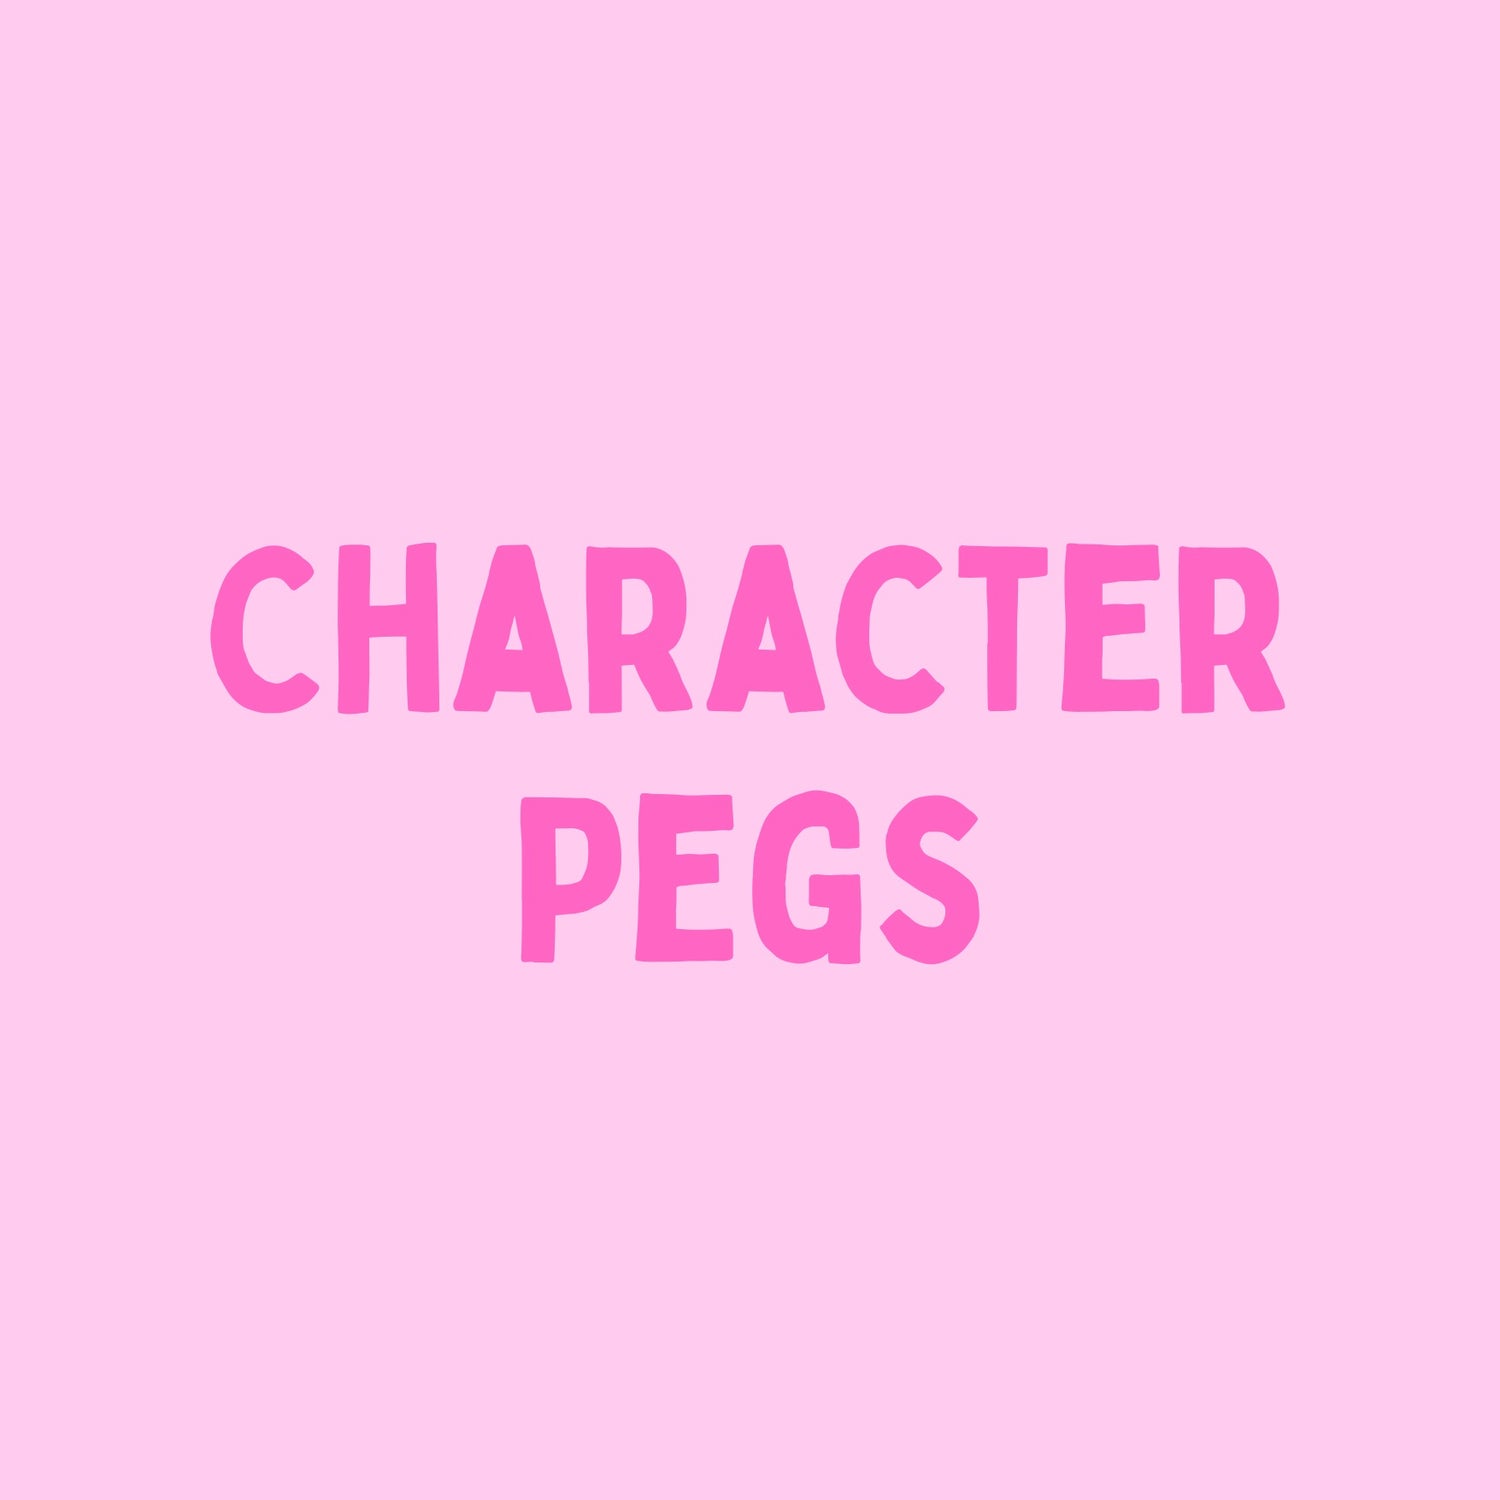 Character Pegs